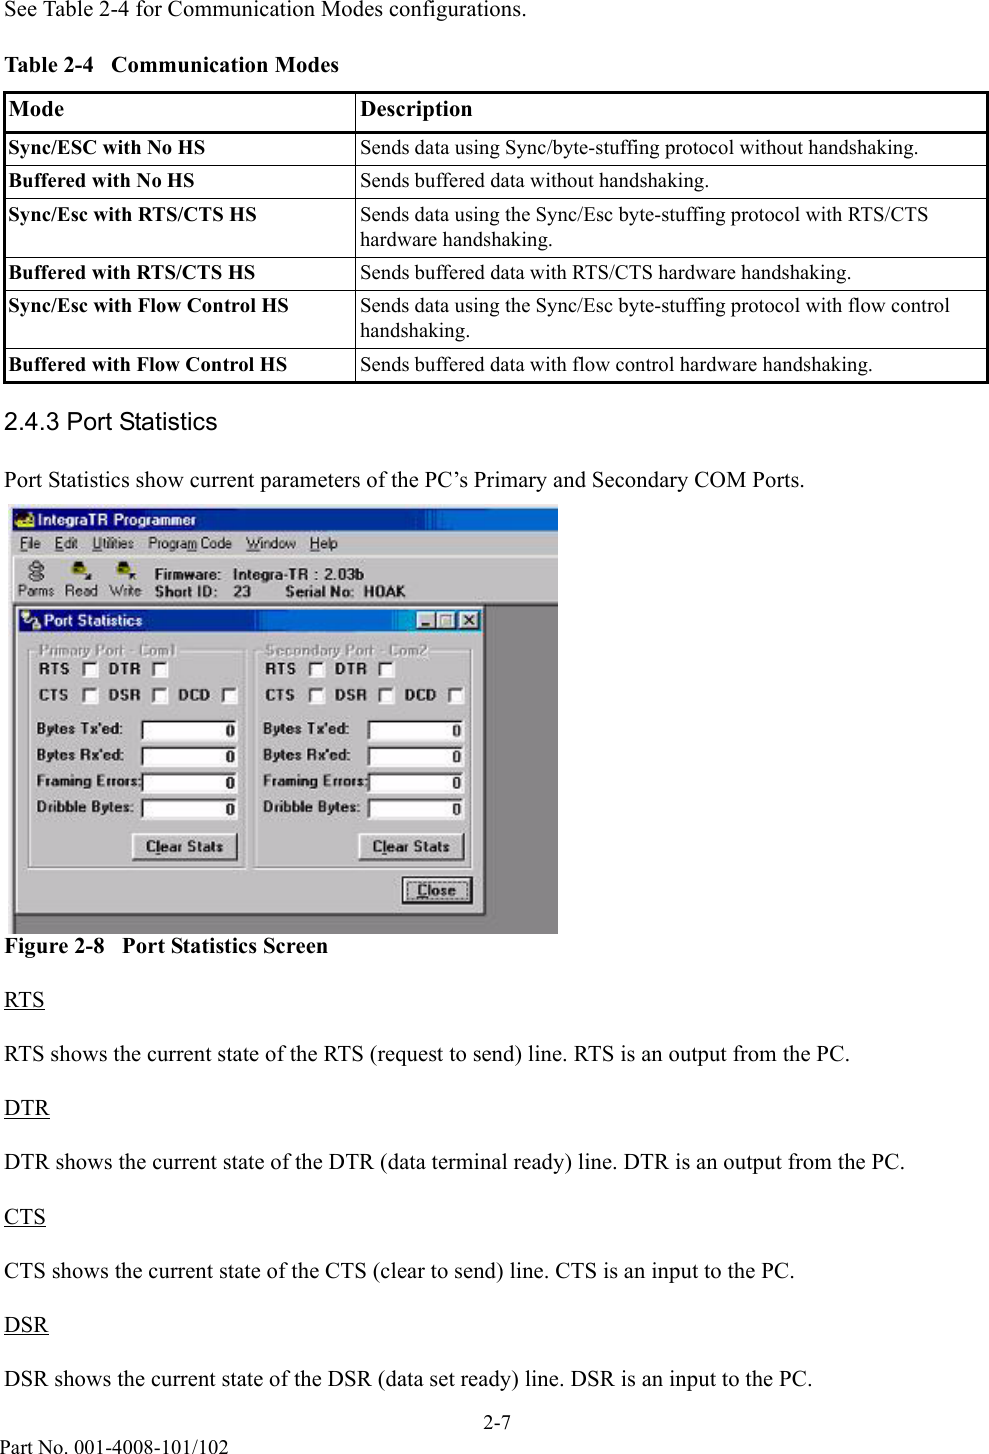 2-7Part No. 001-4008-101/102See Table 2-4 for Communication Modes configurations.2.4.3 Port StatisticsPort Statistics show current parameters of the PC’s Primary and Secondary COM Ports.Figure 2-8   Port Statistics ScreenRTSRTS shows the current state of the RTS (request to send) line. RTS is an output from the PC.DTRDTR shows the current state of the DTR (data terminal ready) line. DTR is an output from the PC.CTSCTS shows the current state of the CTS (clear to send) line. CTS is an input to the PC.DSRDSR shows the current state of the DSR (data set ready) line. DSR is an input to the PC.Table 2-4   Communication ModesMode DescriptionSync/ESC with No HS Sends data using Sync/byte-stuffing protocol without handshaking.Buffered with No HS Sends buffered data without handshaking.Sync/Esc with RTS/CTS HS Sends data using the Sync/Esc byte-stuffing protocol with RTS/CTS      hardware handshaking.Buffered with RTS/CTS HS Sends buffered data with RTS/CTS hardware handshaking.Sync/Esc with Flow Control HS Sends data using the Sync/Esc byte-stuffing protocol with flow controlhandshaking.Buffered with Flow Control HS Sends buffered data with flow control hardware handshaking.